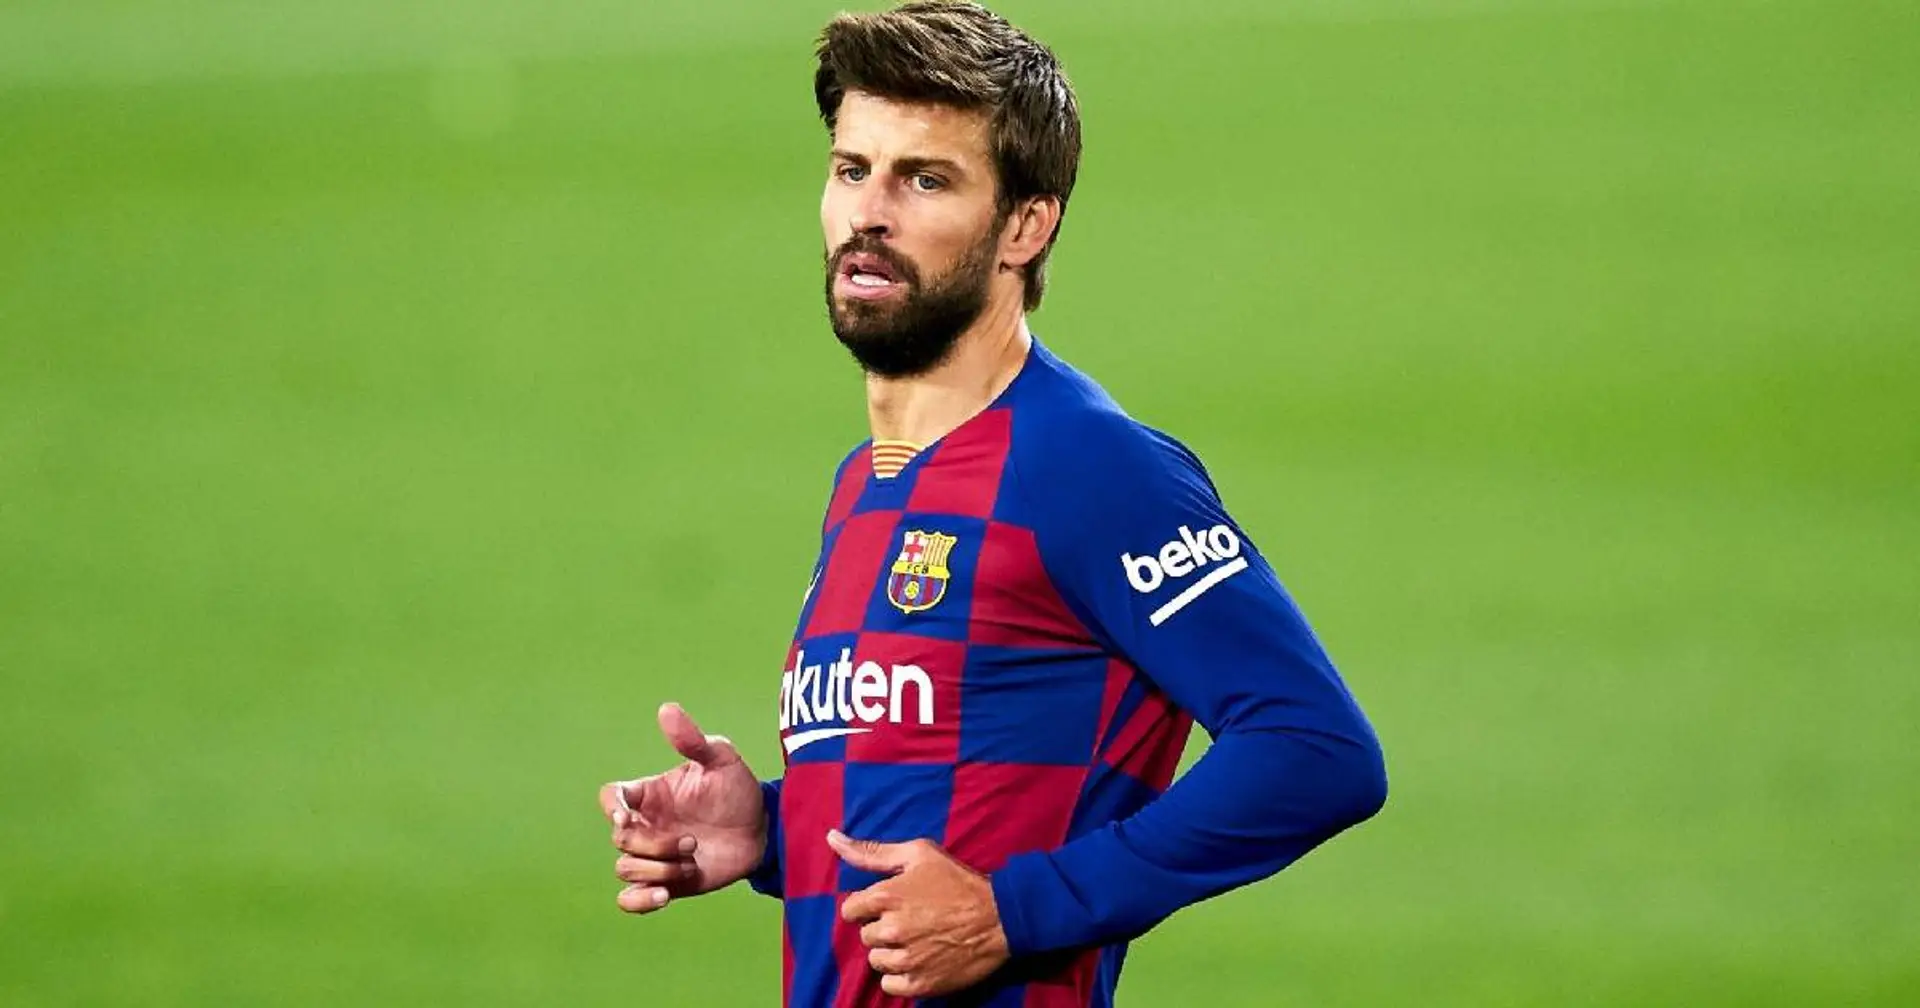 Gerard Pique to reach incredible Barcelona milestone if he plays against Getafe